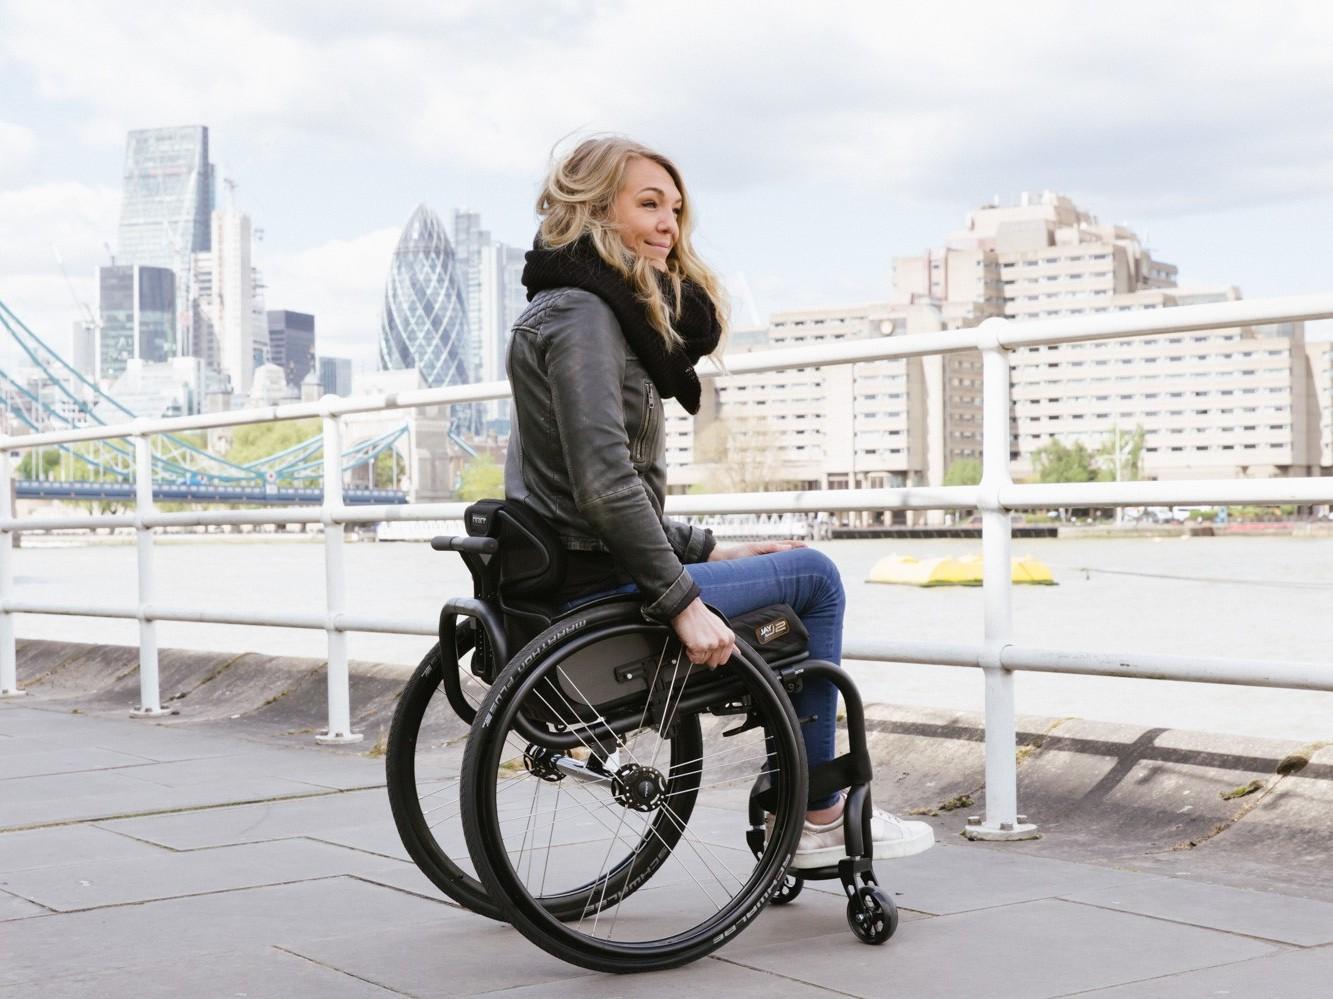 Disability activist Sophie Morgan responded to the new campaign, saying: ‘We will let you know if we need you for anything — otherwise, you can assume we are just fine’